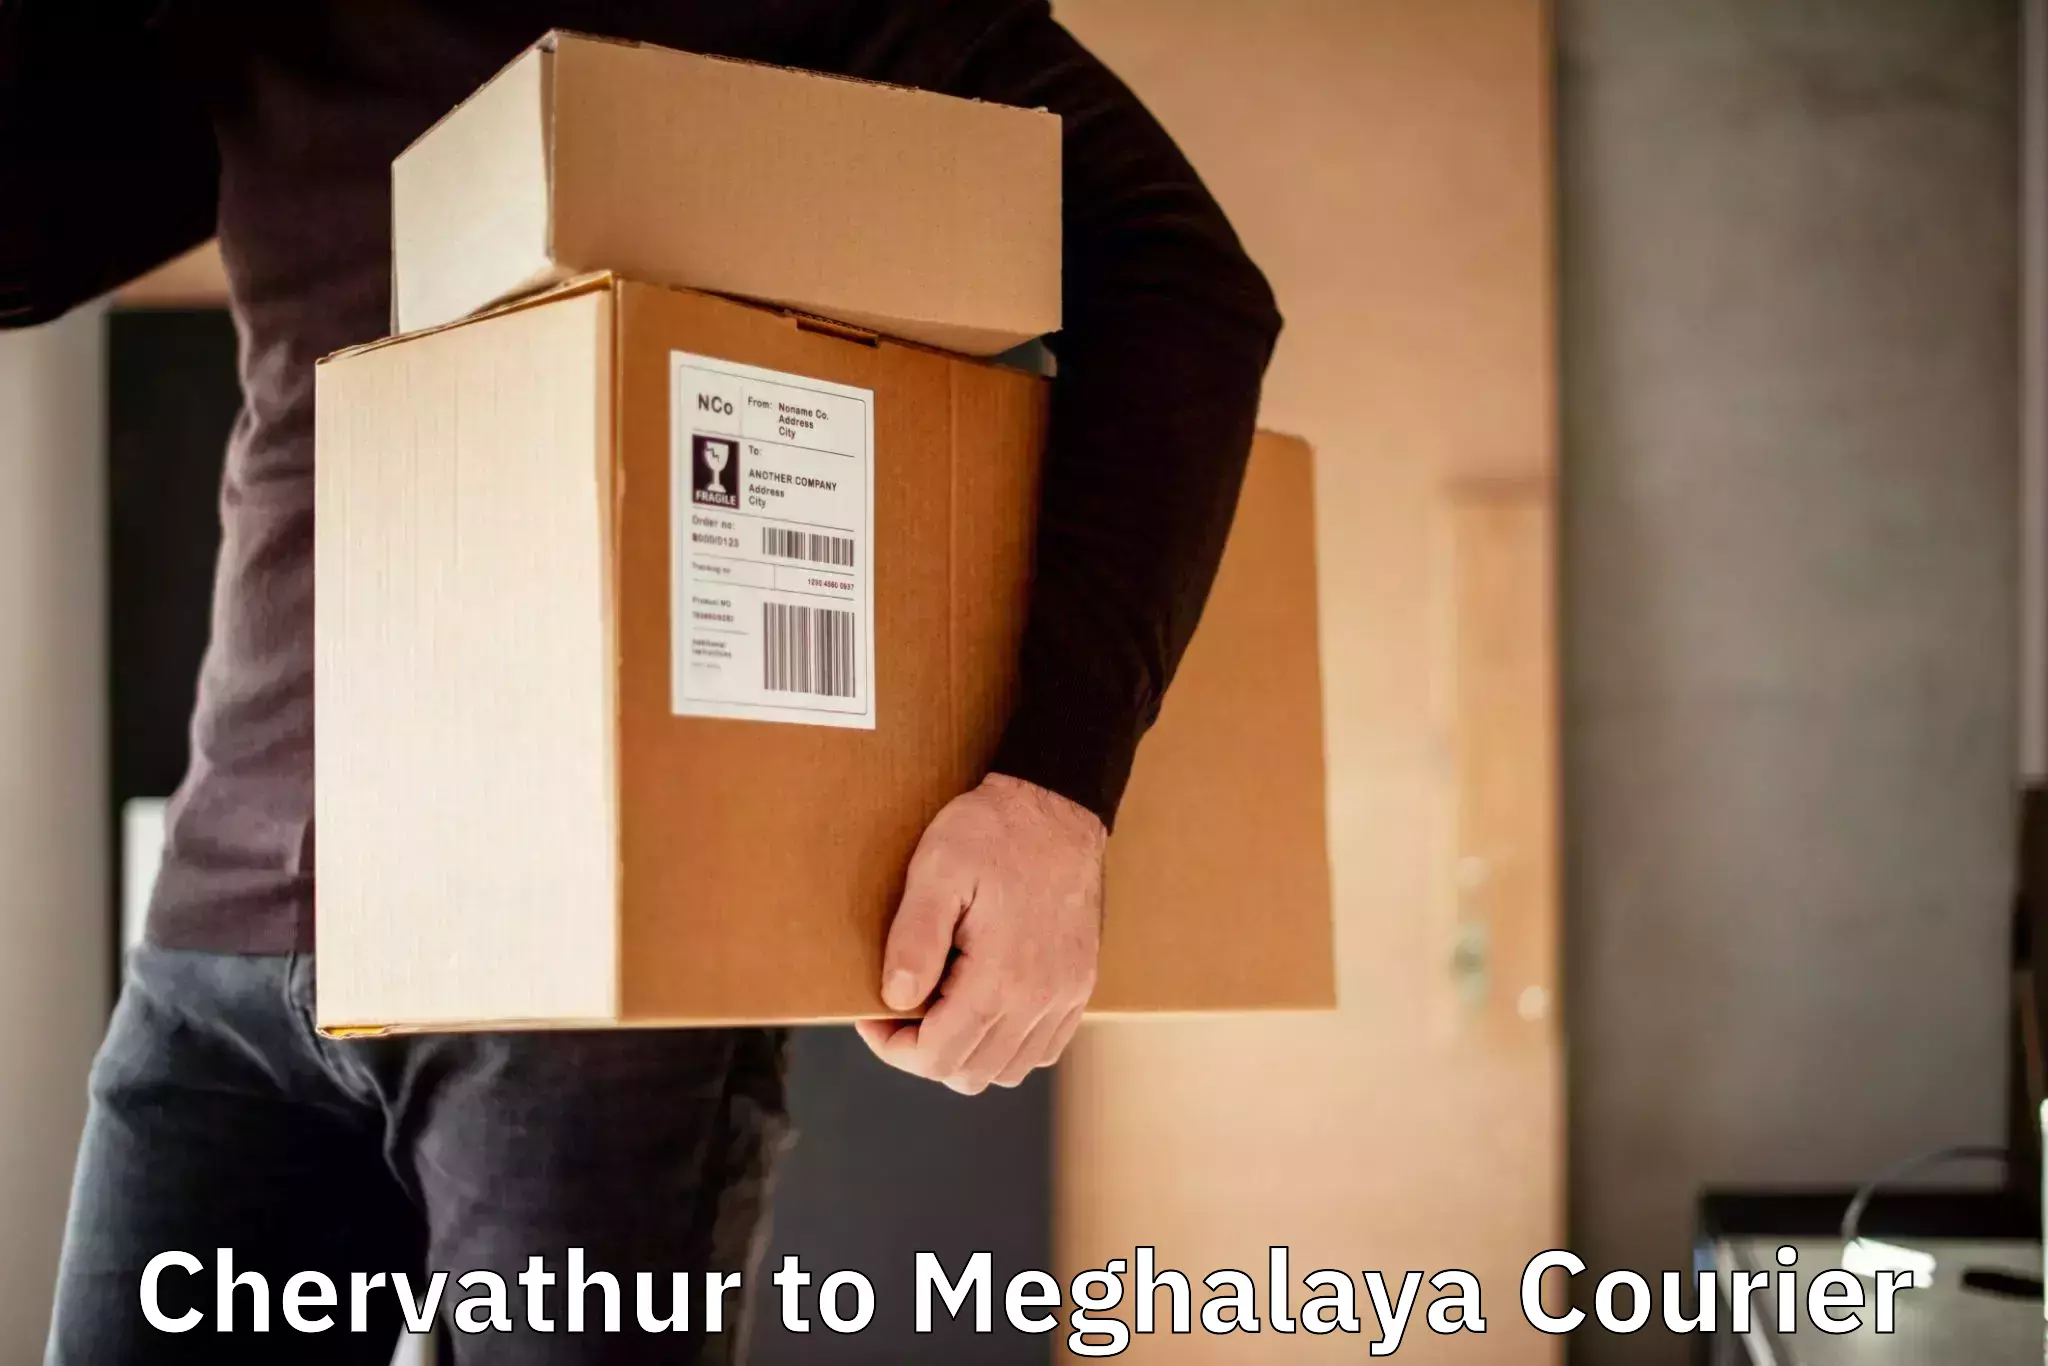 Courier service booking Chervathur to Meghalaya